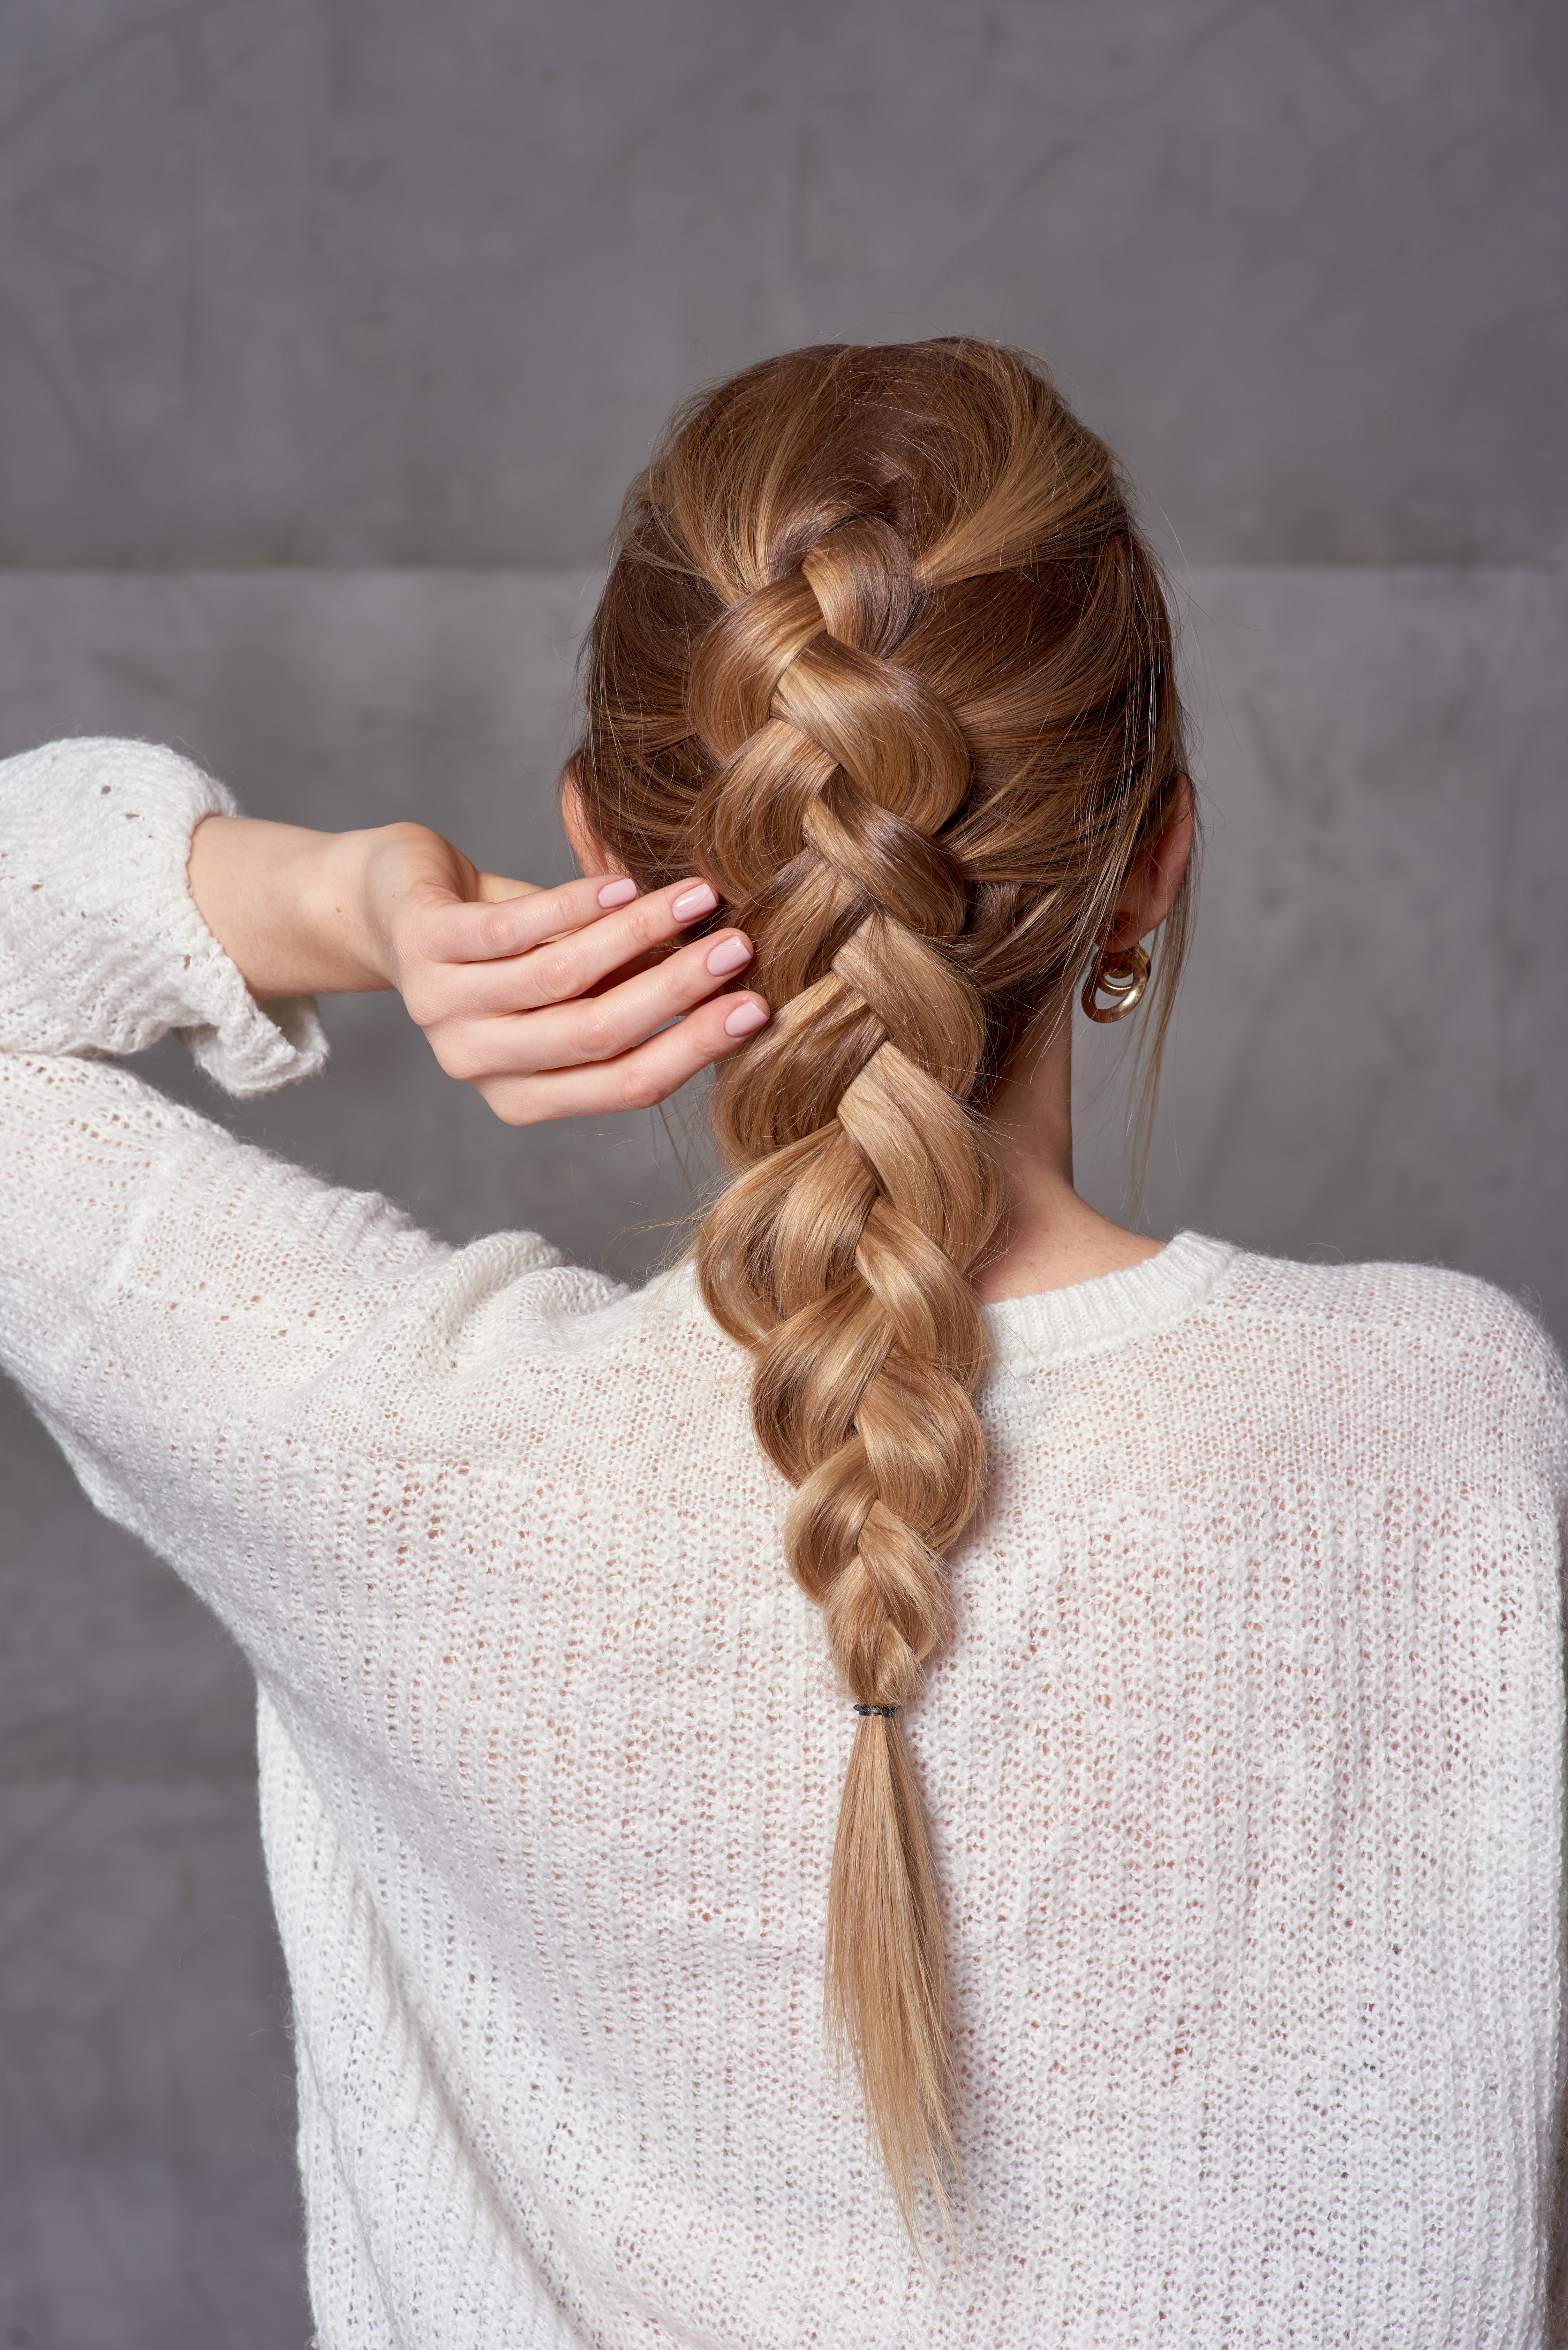 3 Ways to Dutch Braid Your Hair with Step-By-Step Tutorial for Beginners